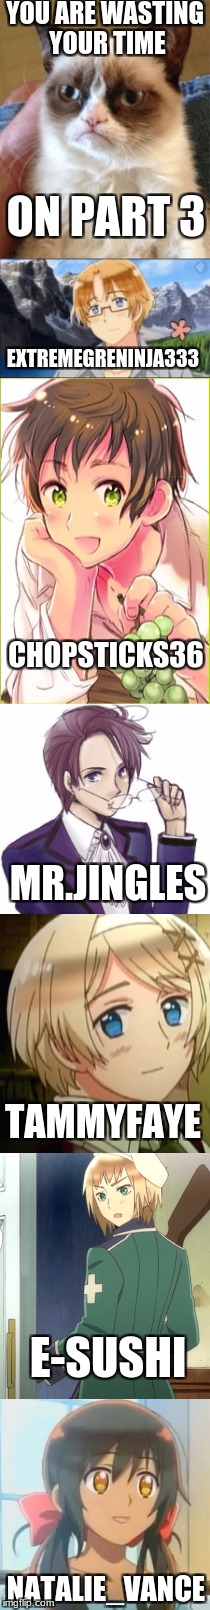 Part 3 of Comparing Hetalia to Imgflip | YOU ARE WASTING YOUR TIME; ON PART 3; EXTREMEGRENINJA333; CHOPSTICKS36; MR.JINGLES; TAMMYFAYE; E-SUSHI; NATALIE_VANCE | image tagged in memes,hetalia,imgflip users,extremegreninja333,tammyfaye,e-sushi | made w/ Imgflip meme maker